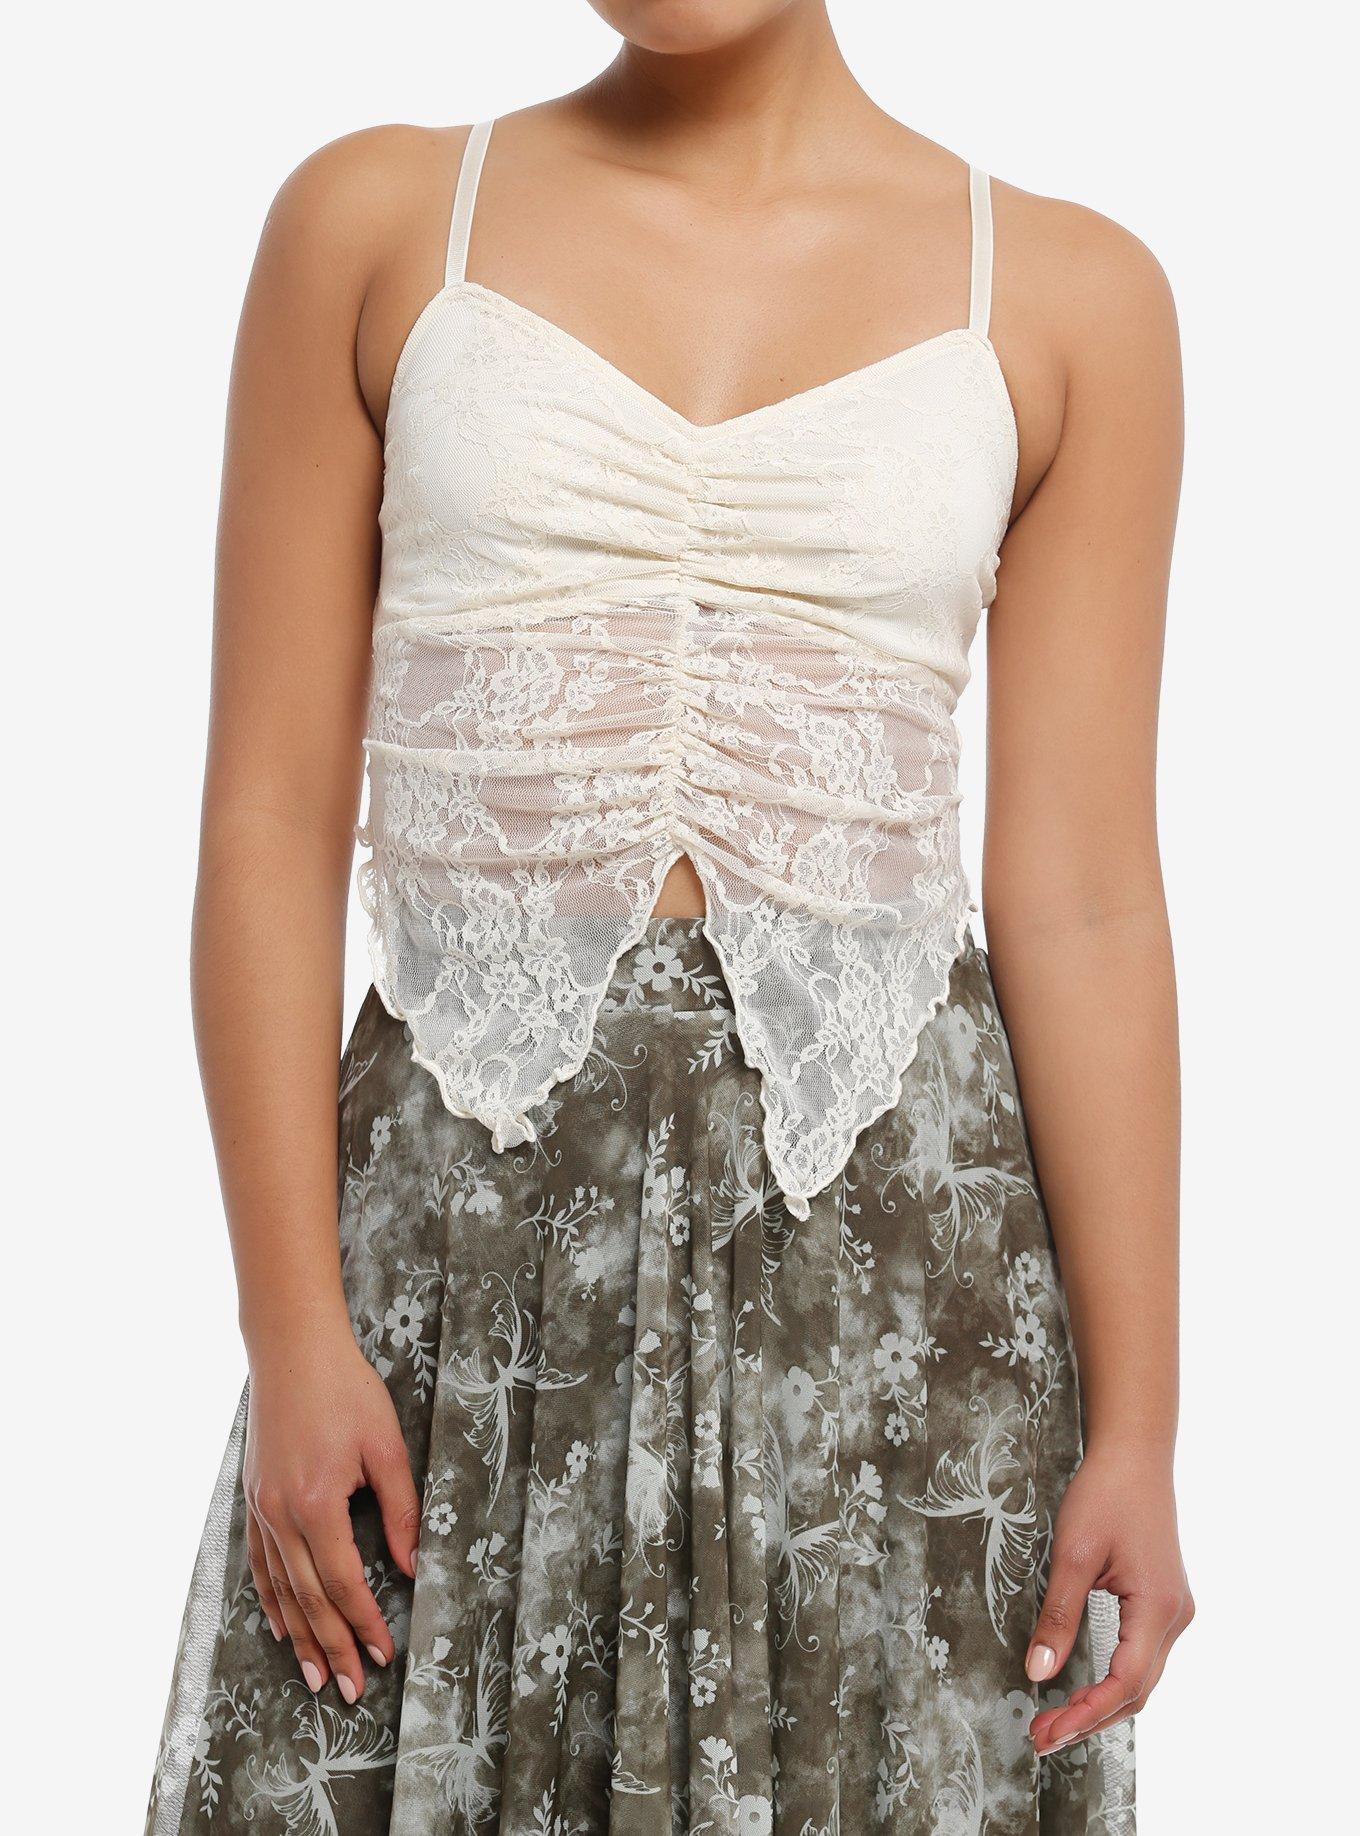 Thorn & Fable® White Lace Butterfly Girls Cami